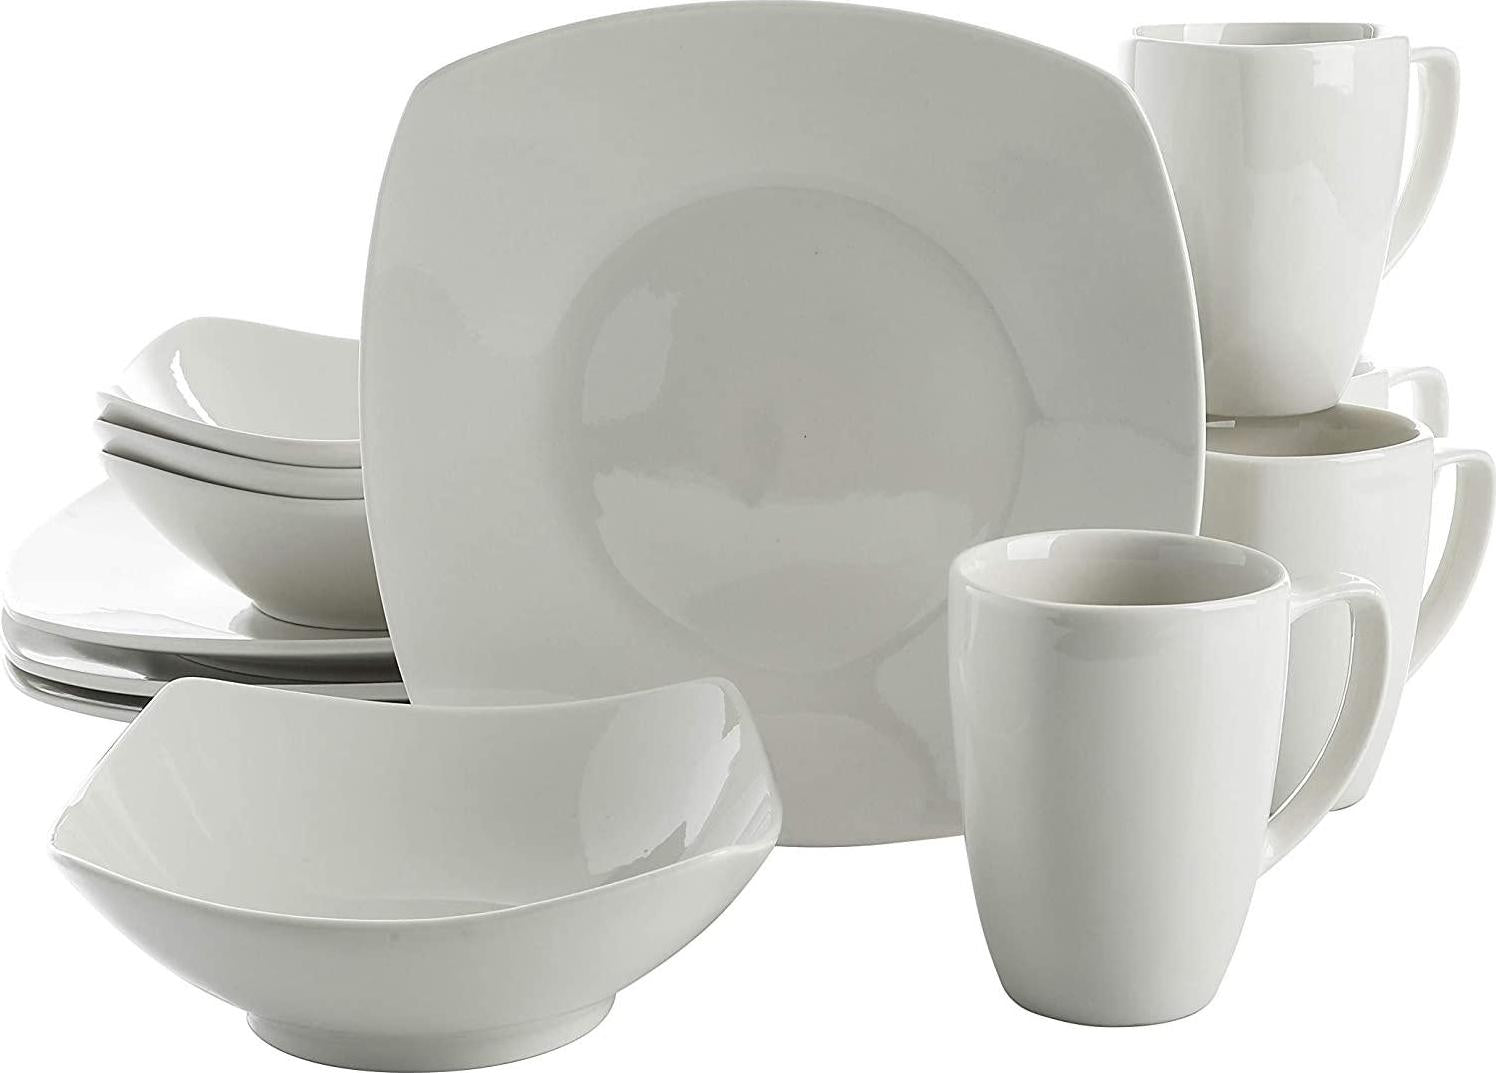 Gibson Home, Gibson Home Amelia Court Porcelain Dinnerware Set, Service for 4 (12pcs), White (Soft Square)